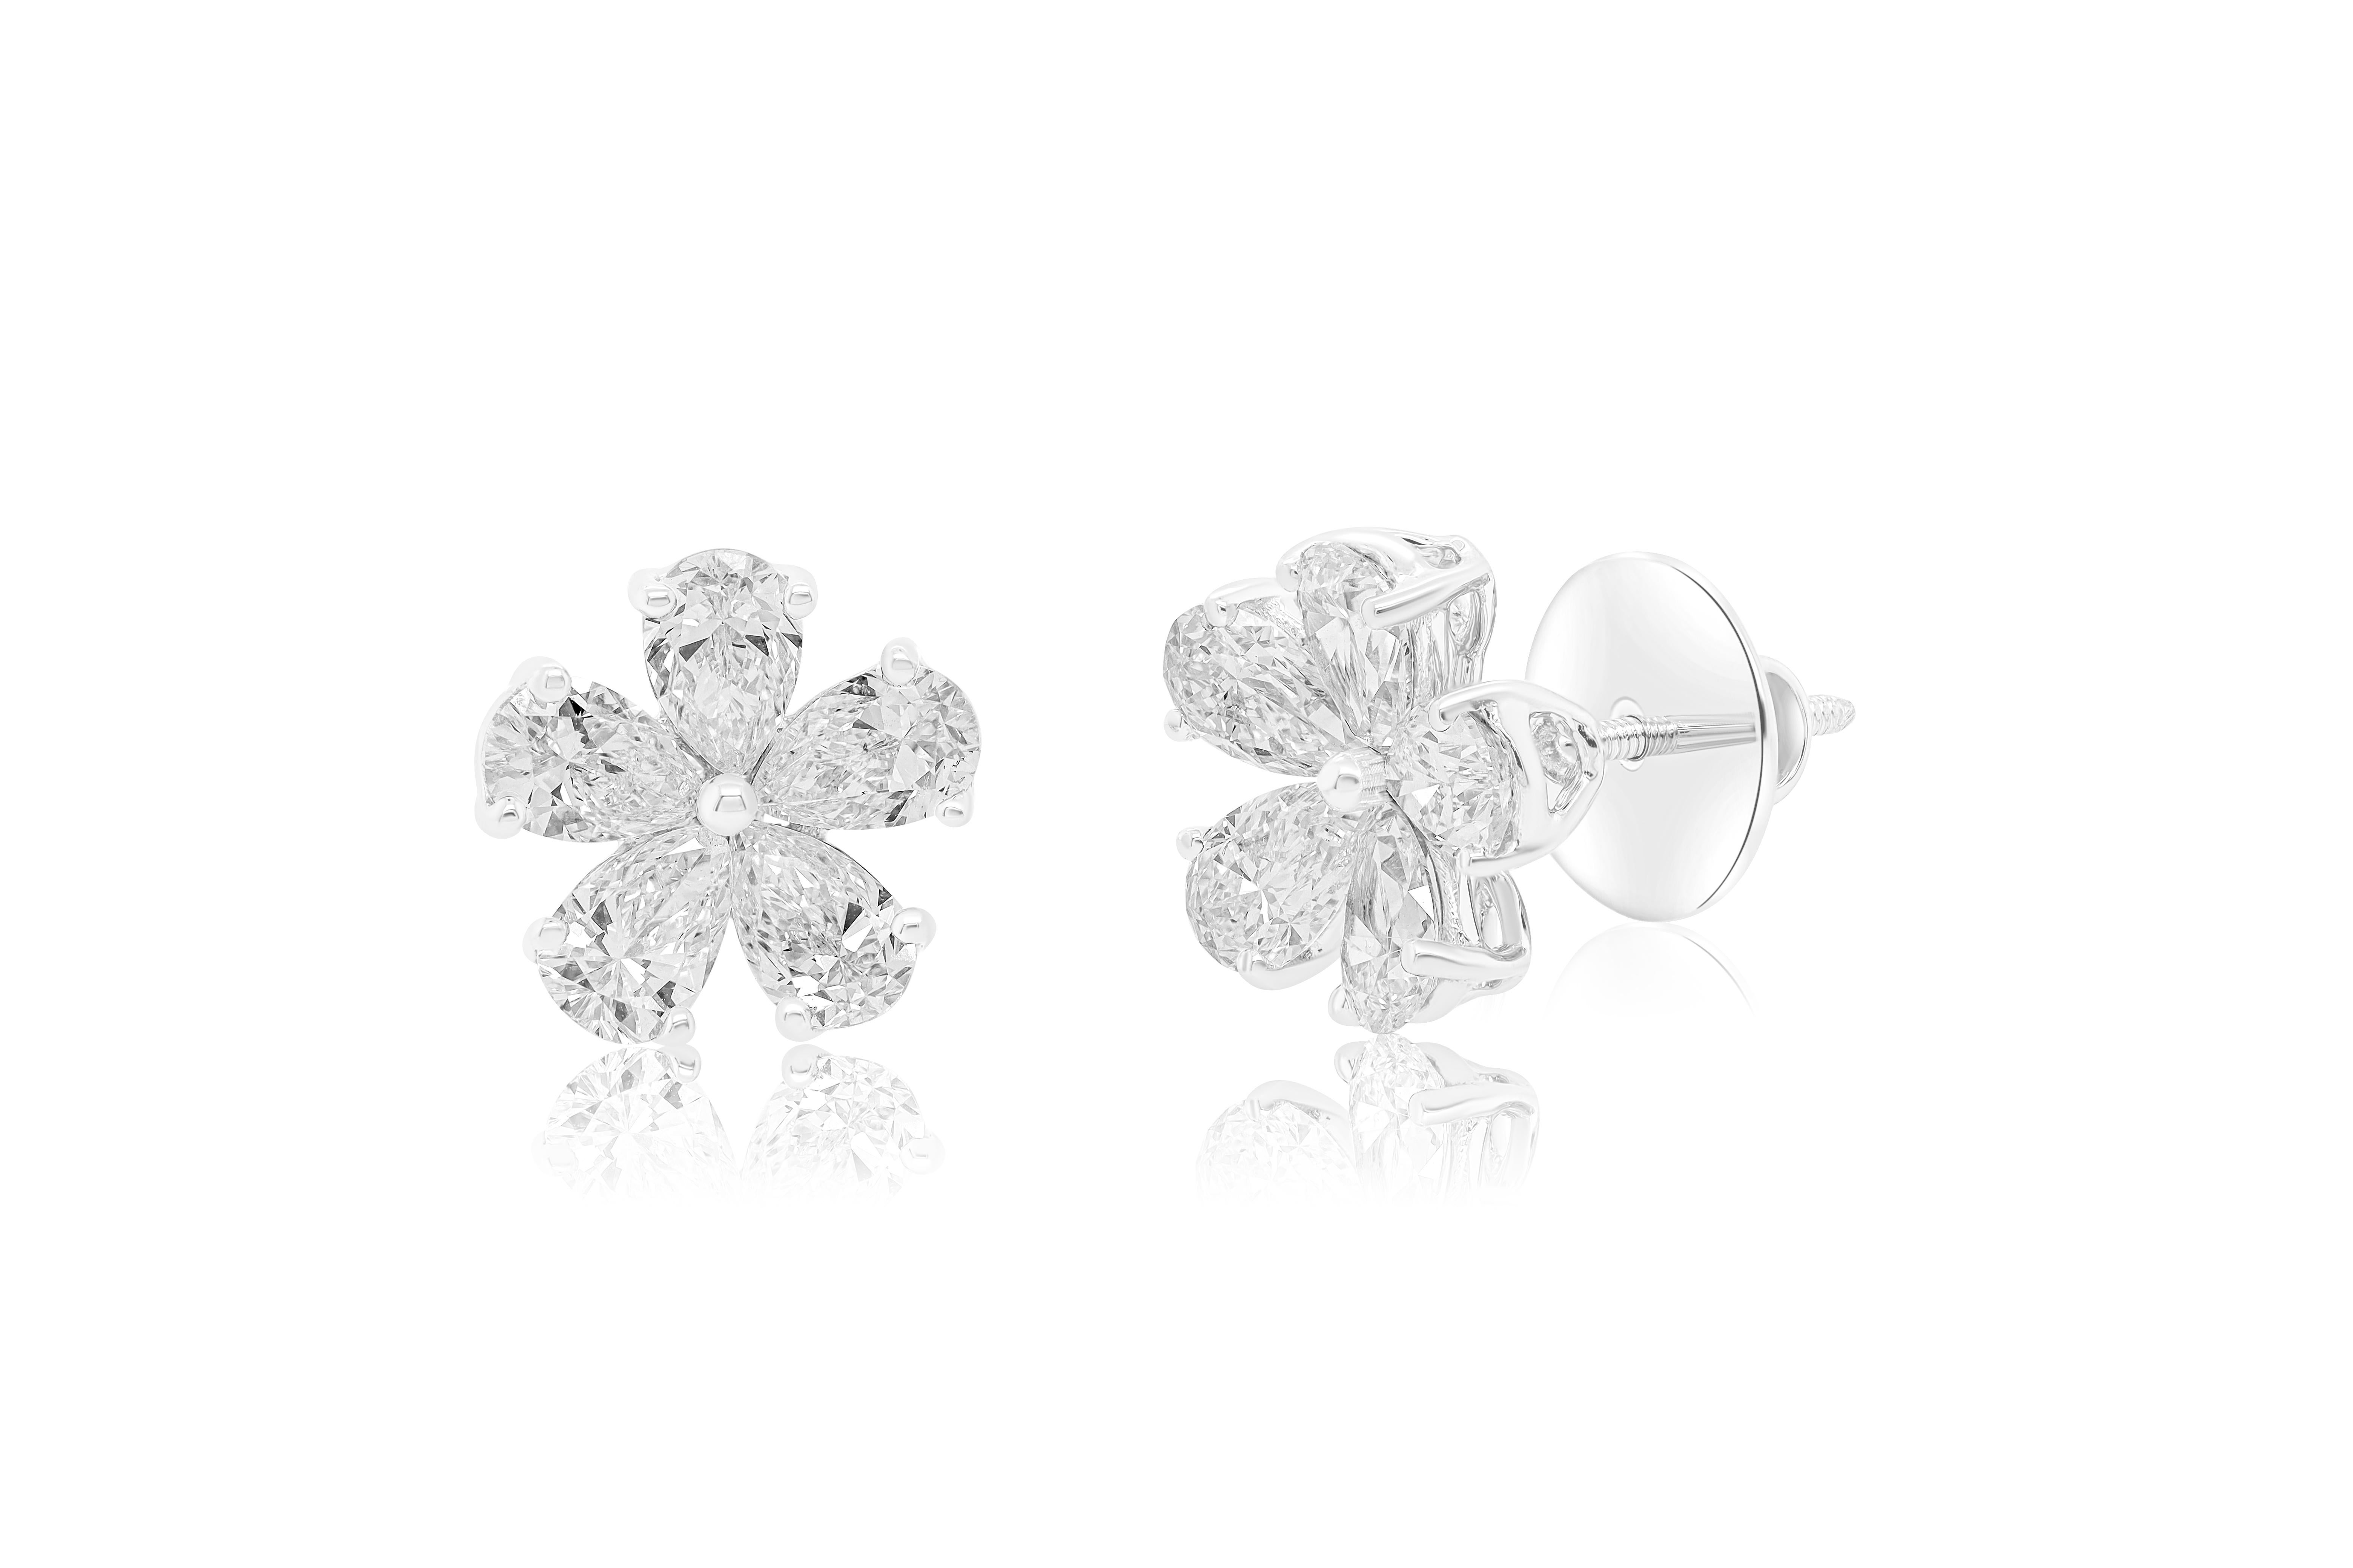 Pear Cut Diana M. 18KT WHITE GOLD EARRING STUDS FLOWER PEAR SHAPE 4.01cts  DIAMONDS For Sale